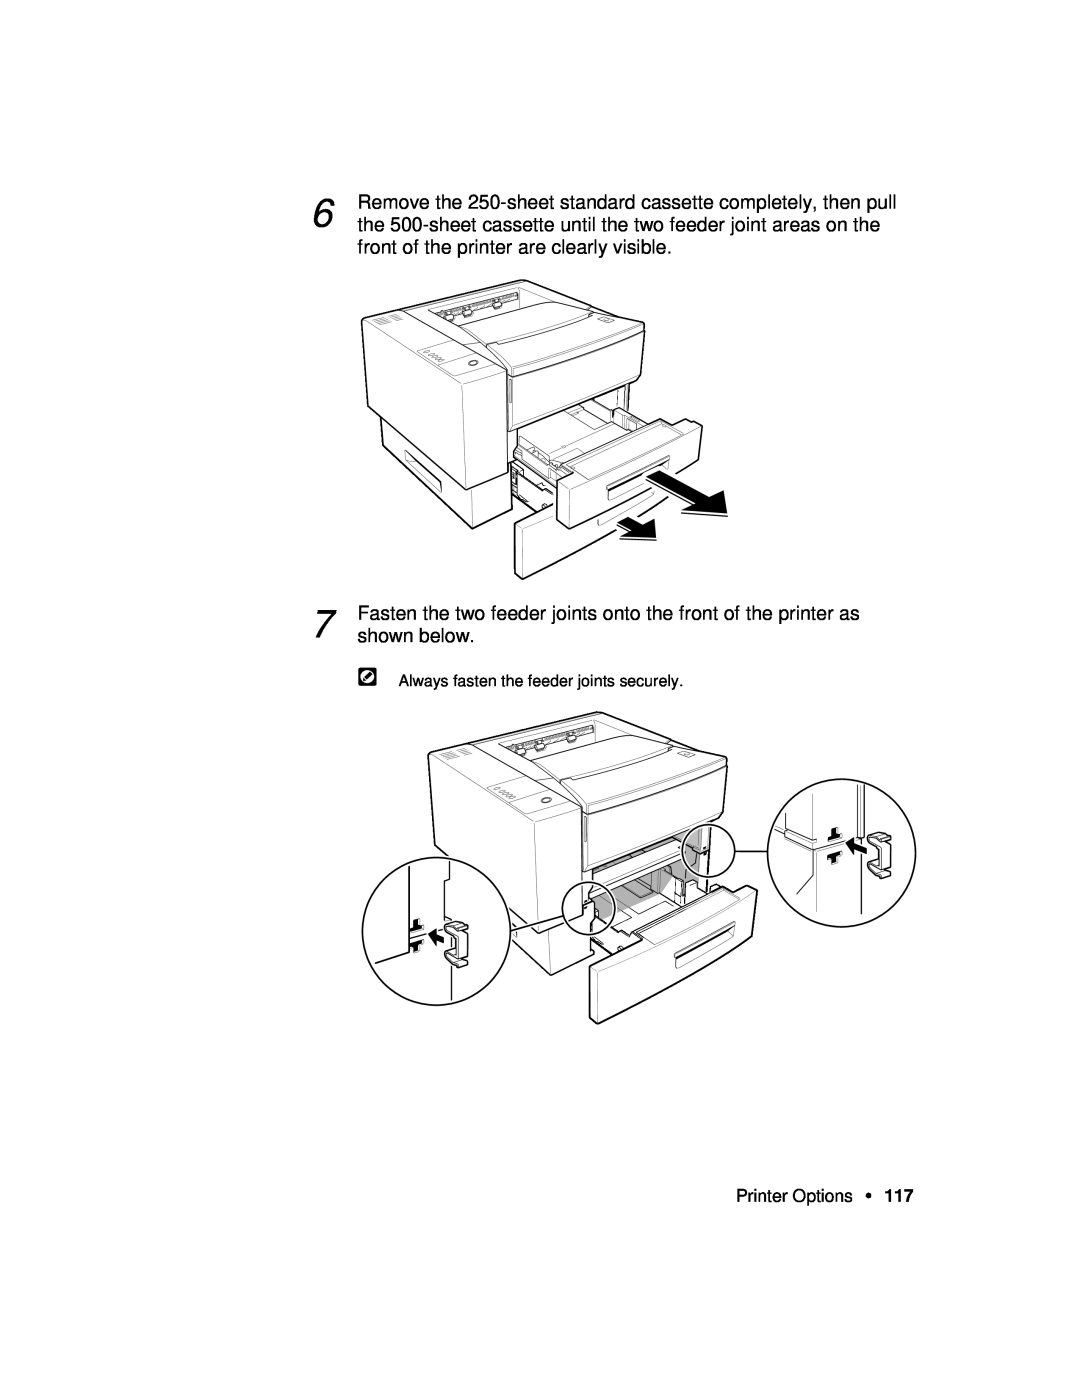 Xerox P12 manual Remove the 250-sheet standard cassette completely, then pull, front of the printer are clearly visible 